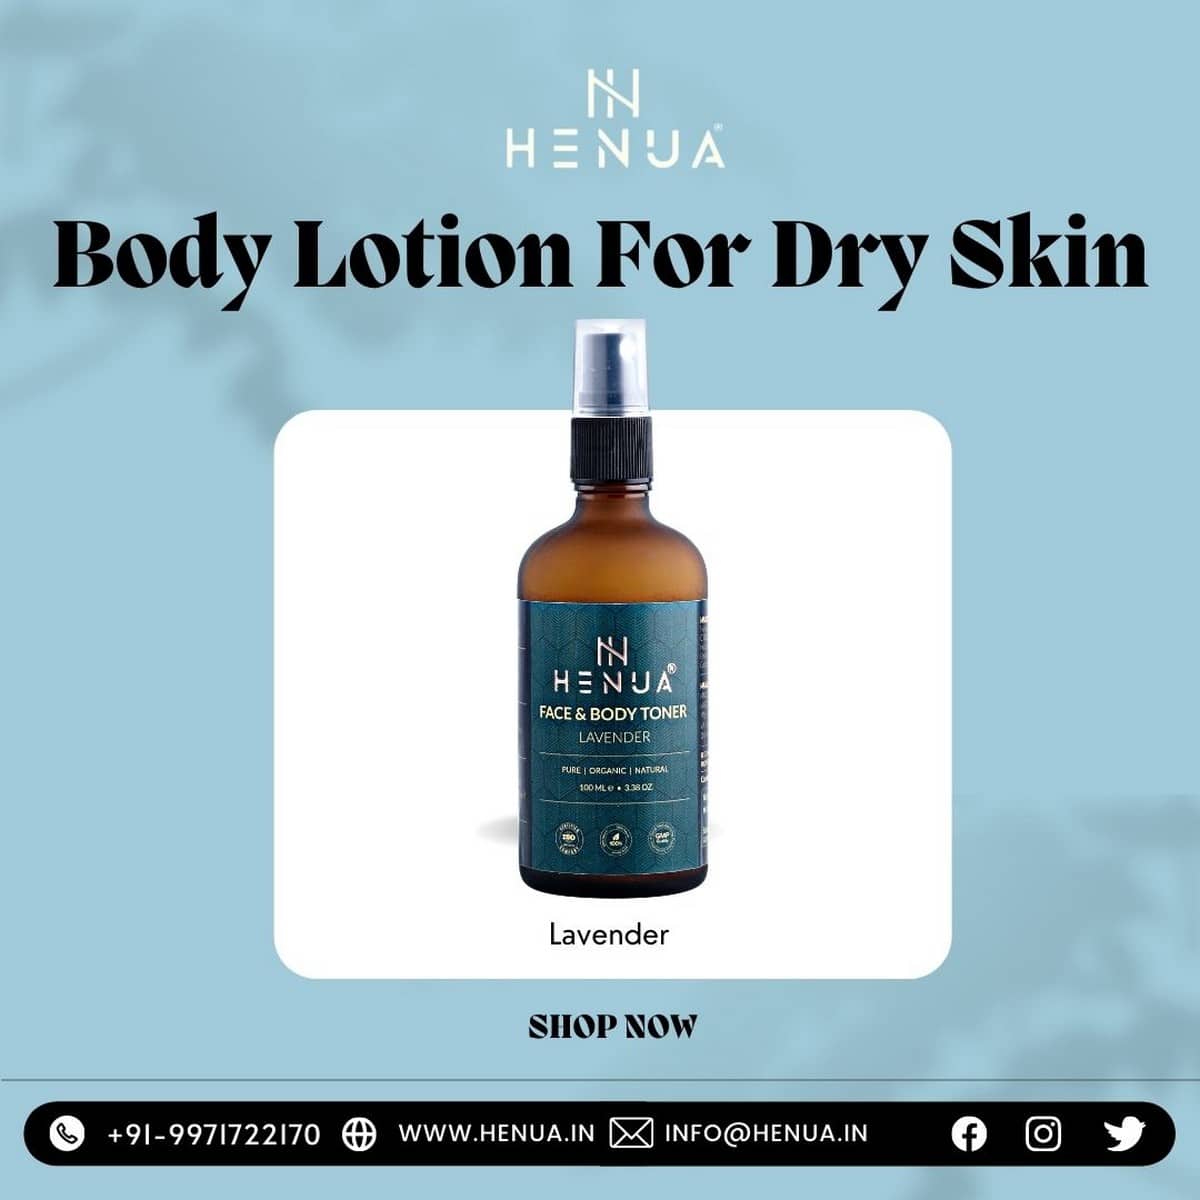 Body-Lotion-For-Dry-Skin-2